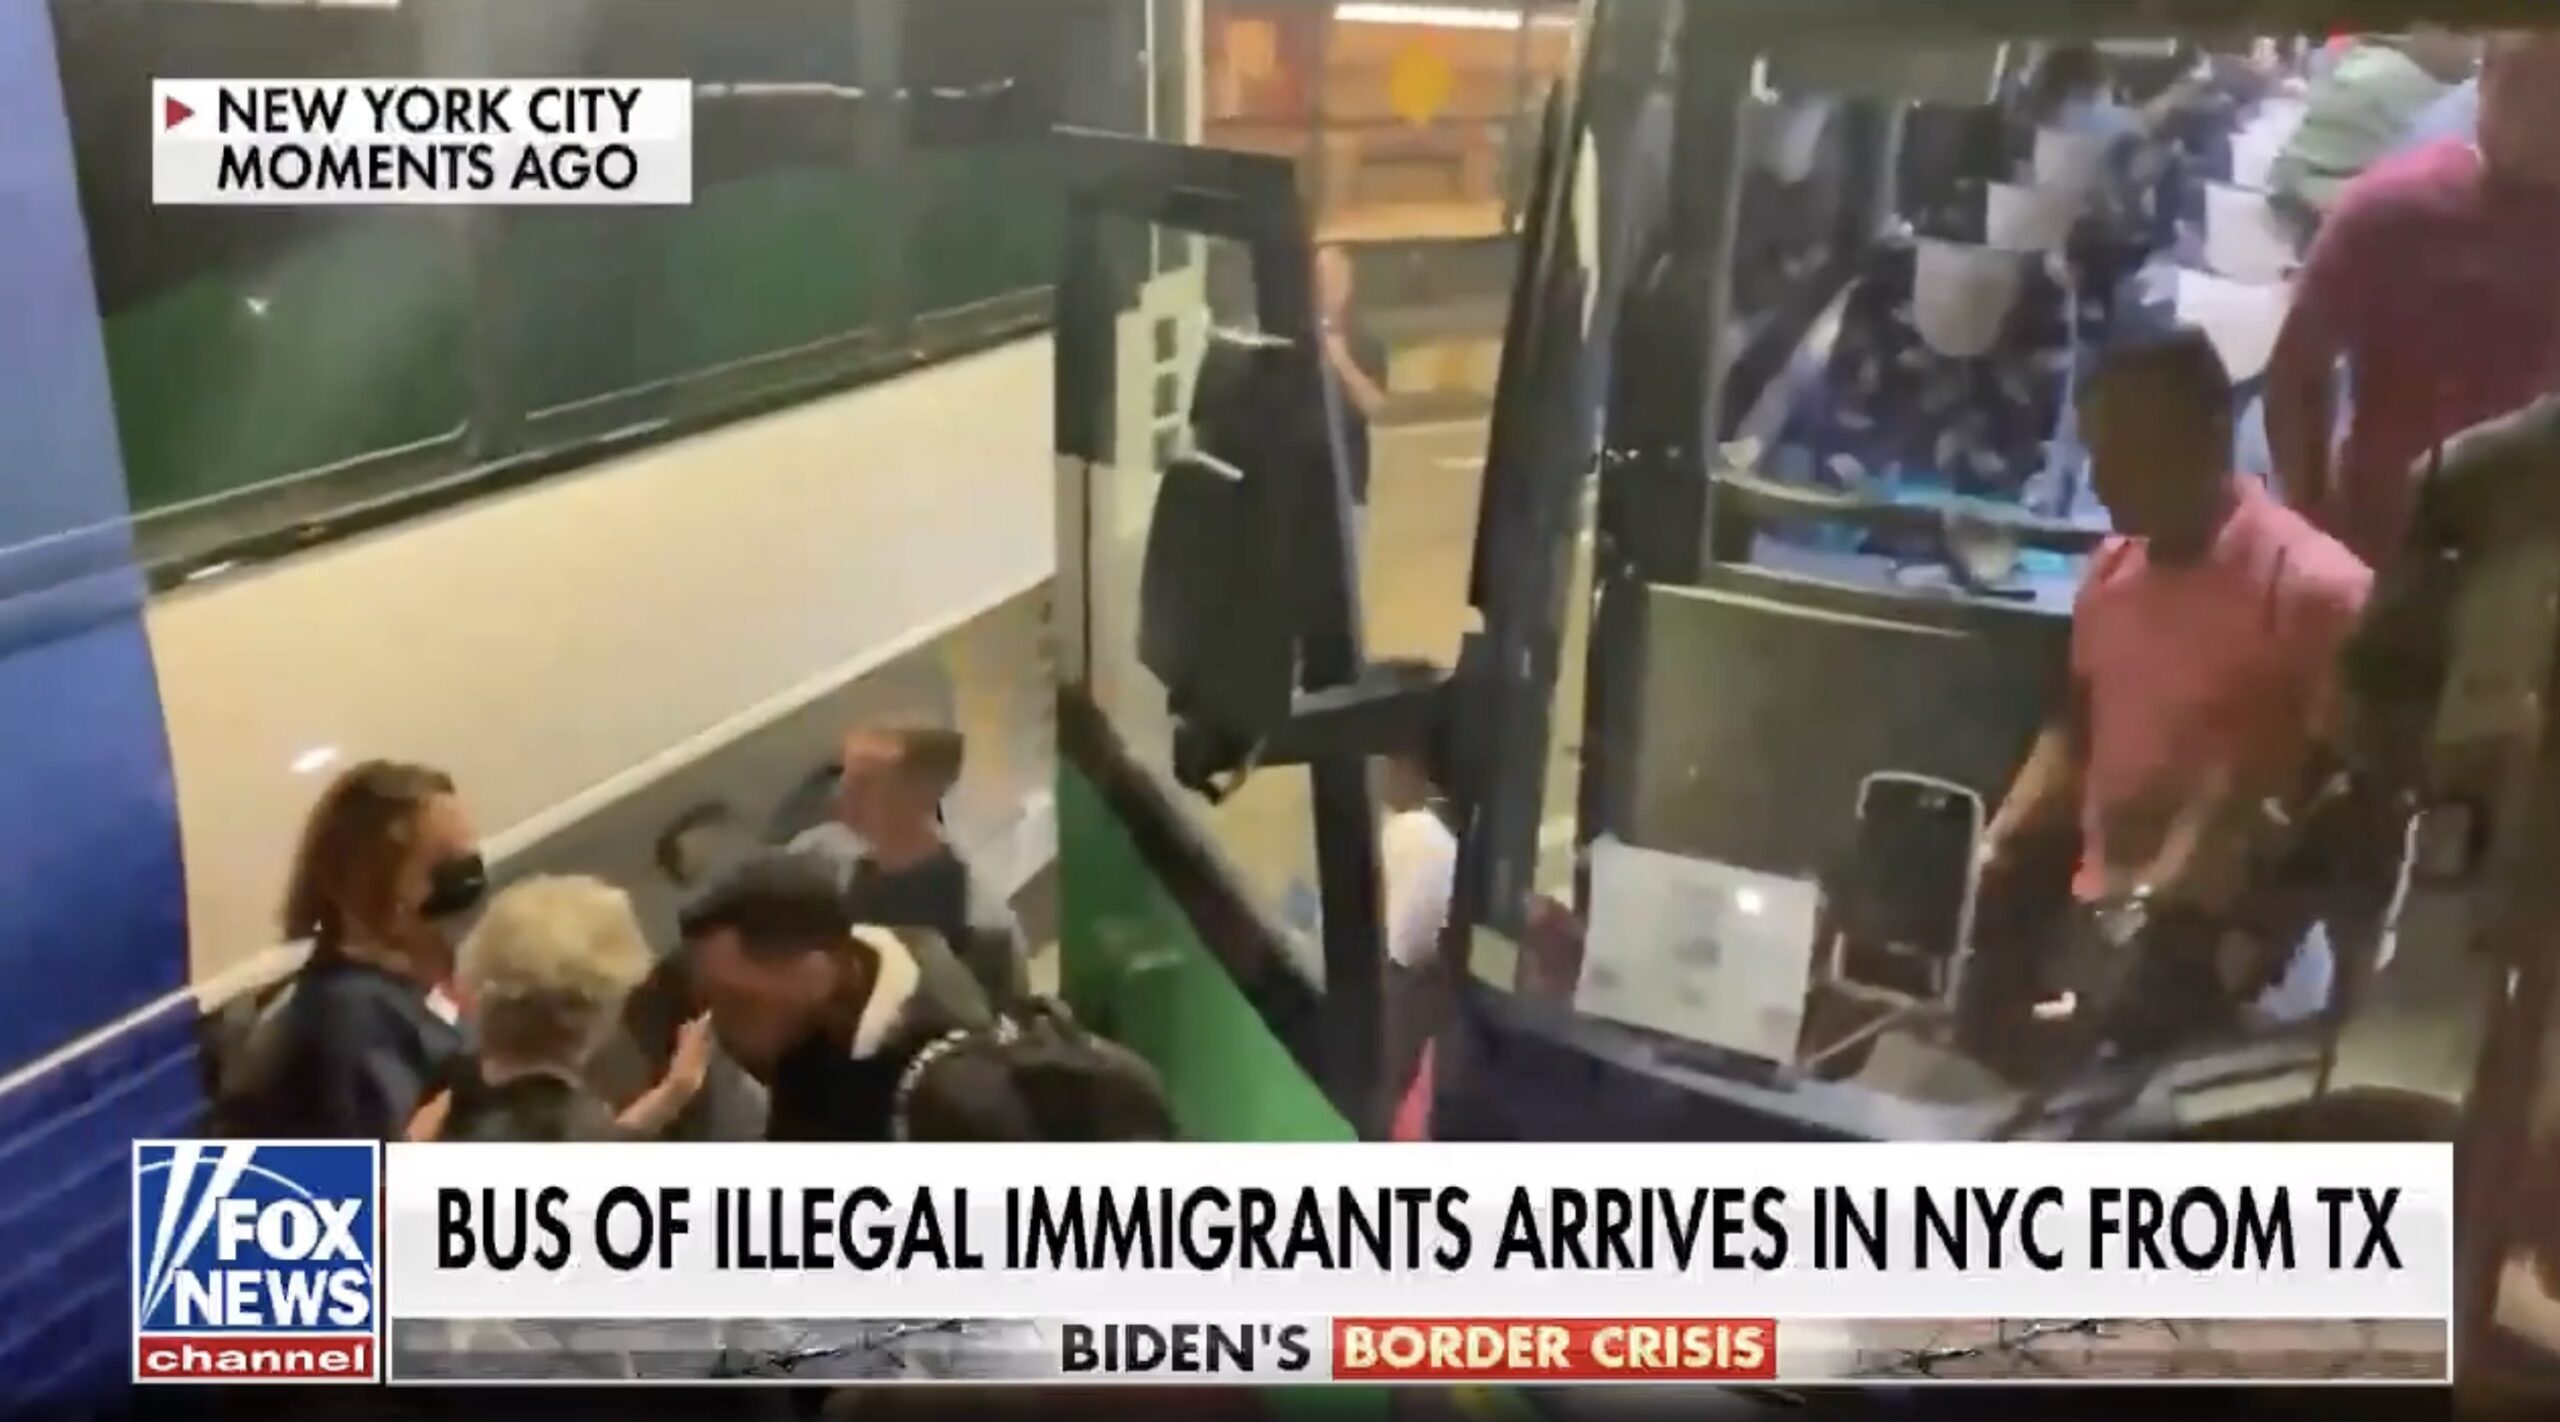 Here It Comes: First Bus of Illegal Immigrants from Texas Arrives in New York City (VIDEO)